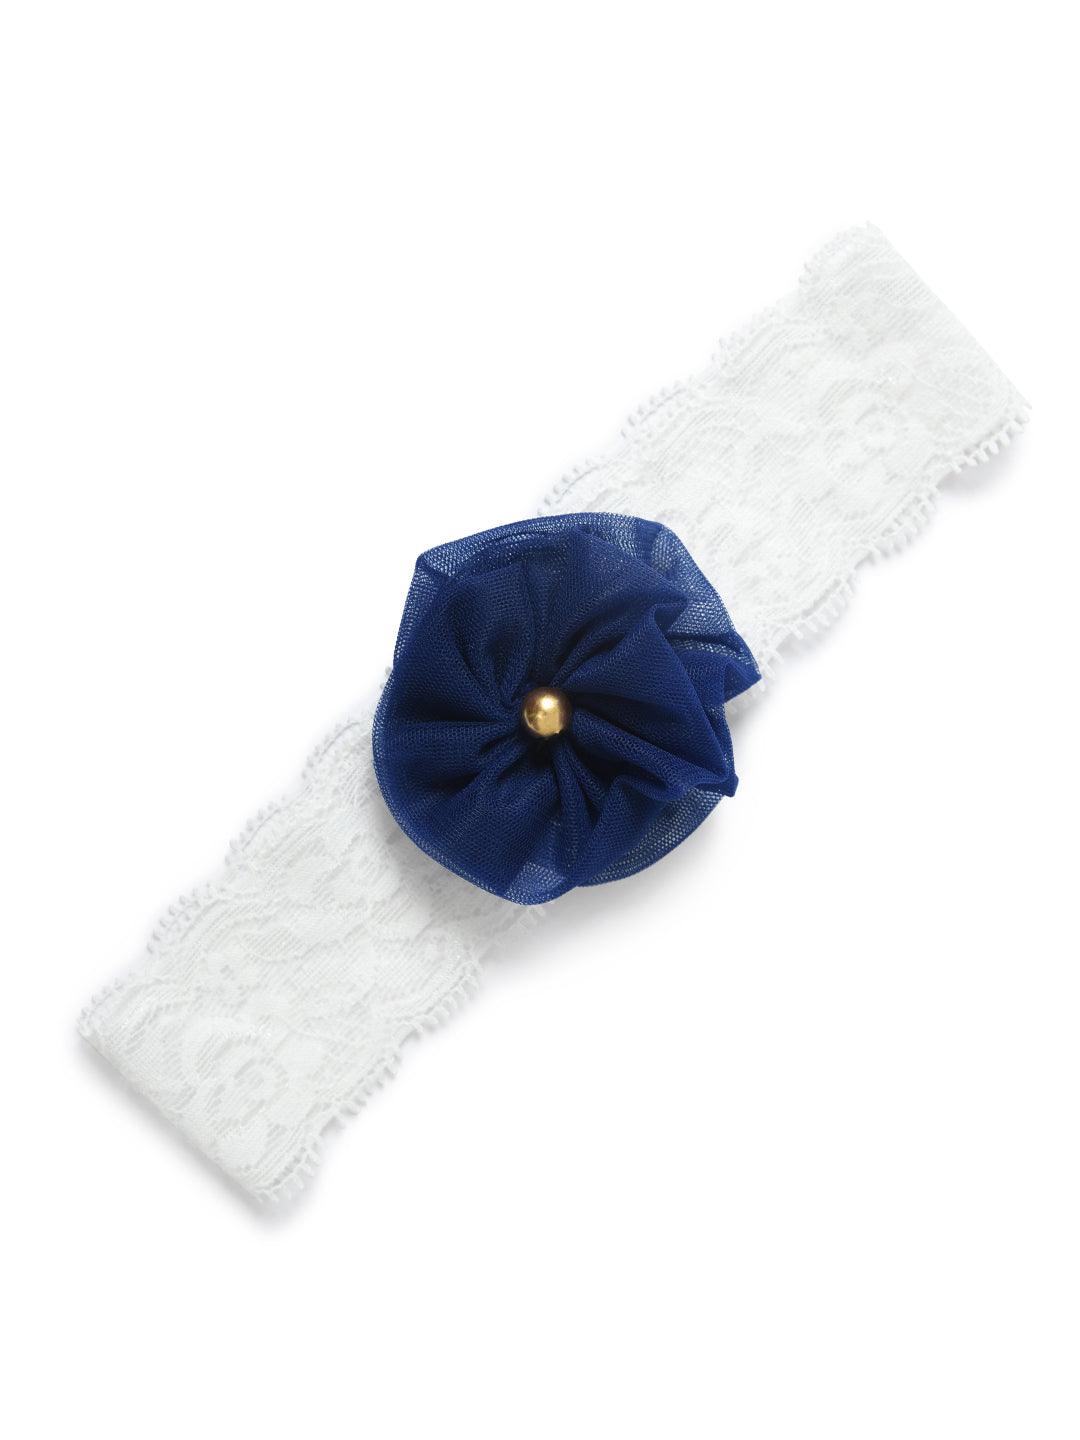 Curls & Coils Trendy Floral Headband for Girls